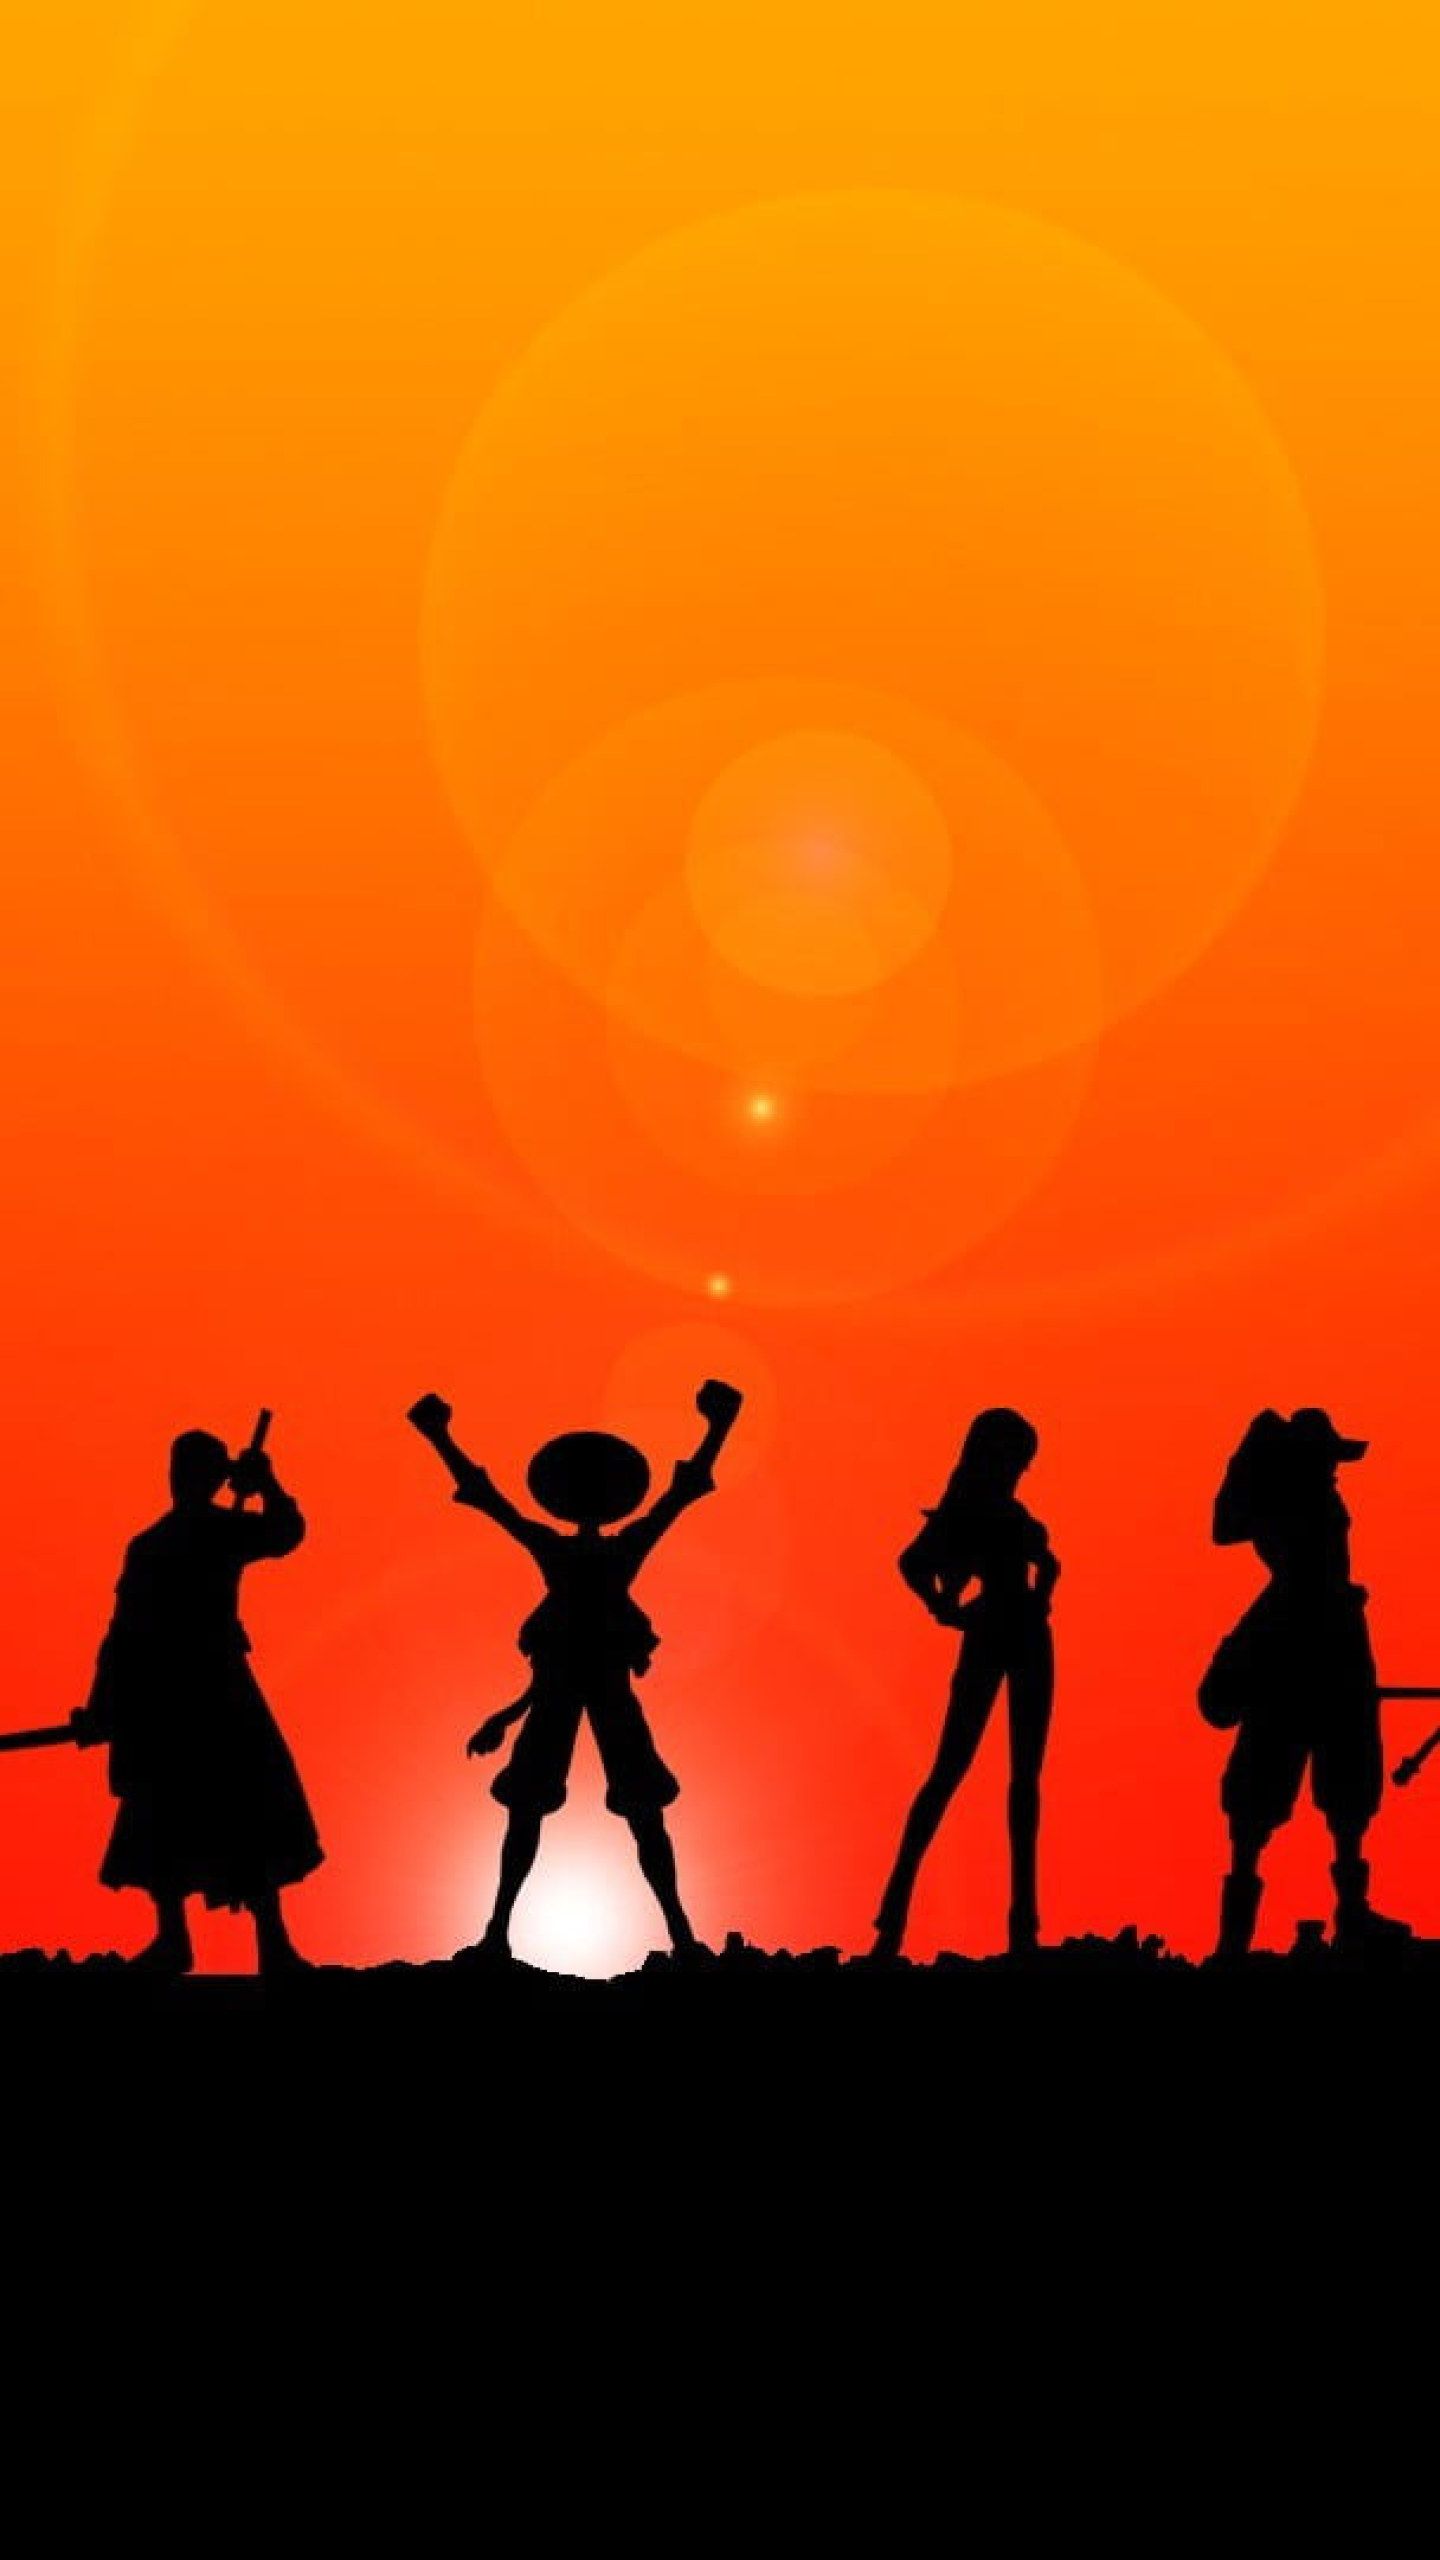 One Piece Silhouette Wallpapers - Top Free One Piece Silhouette ...